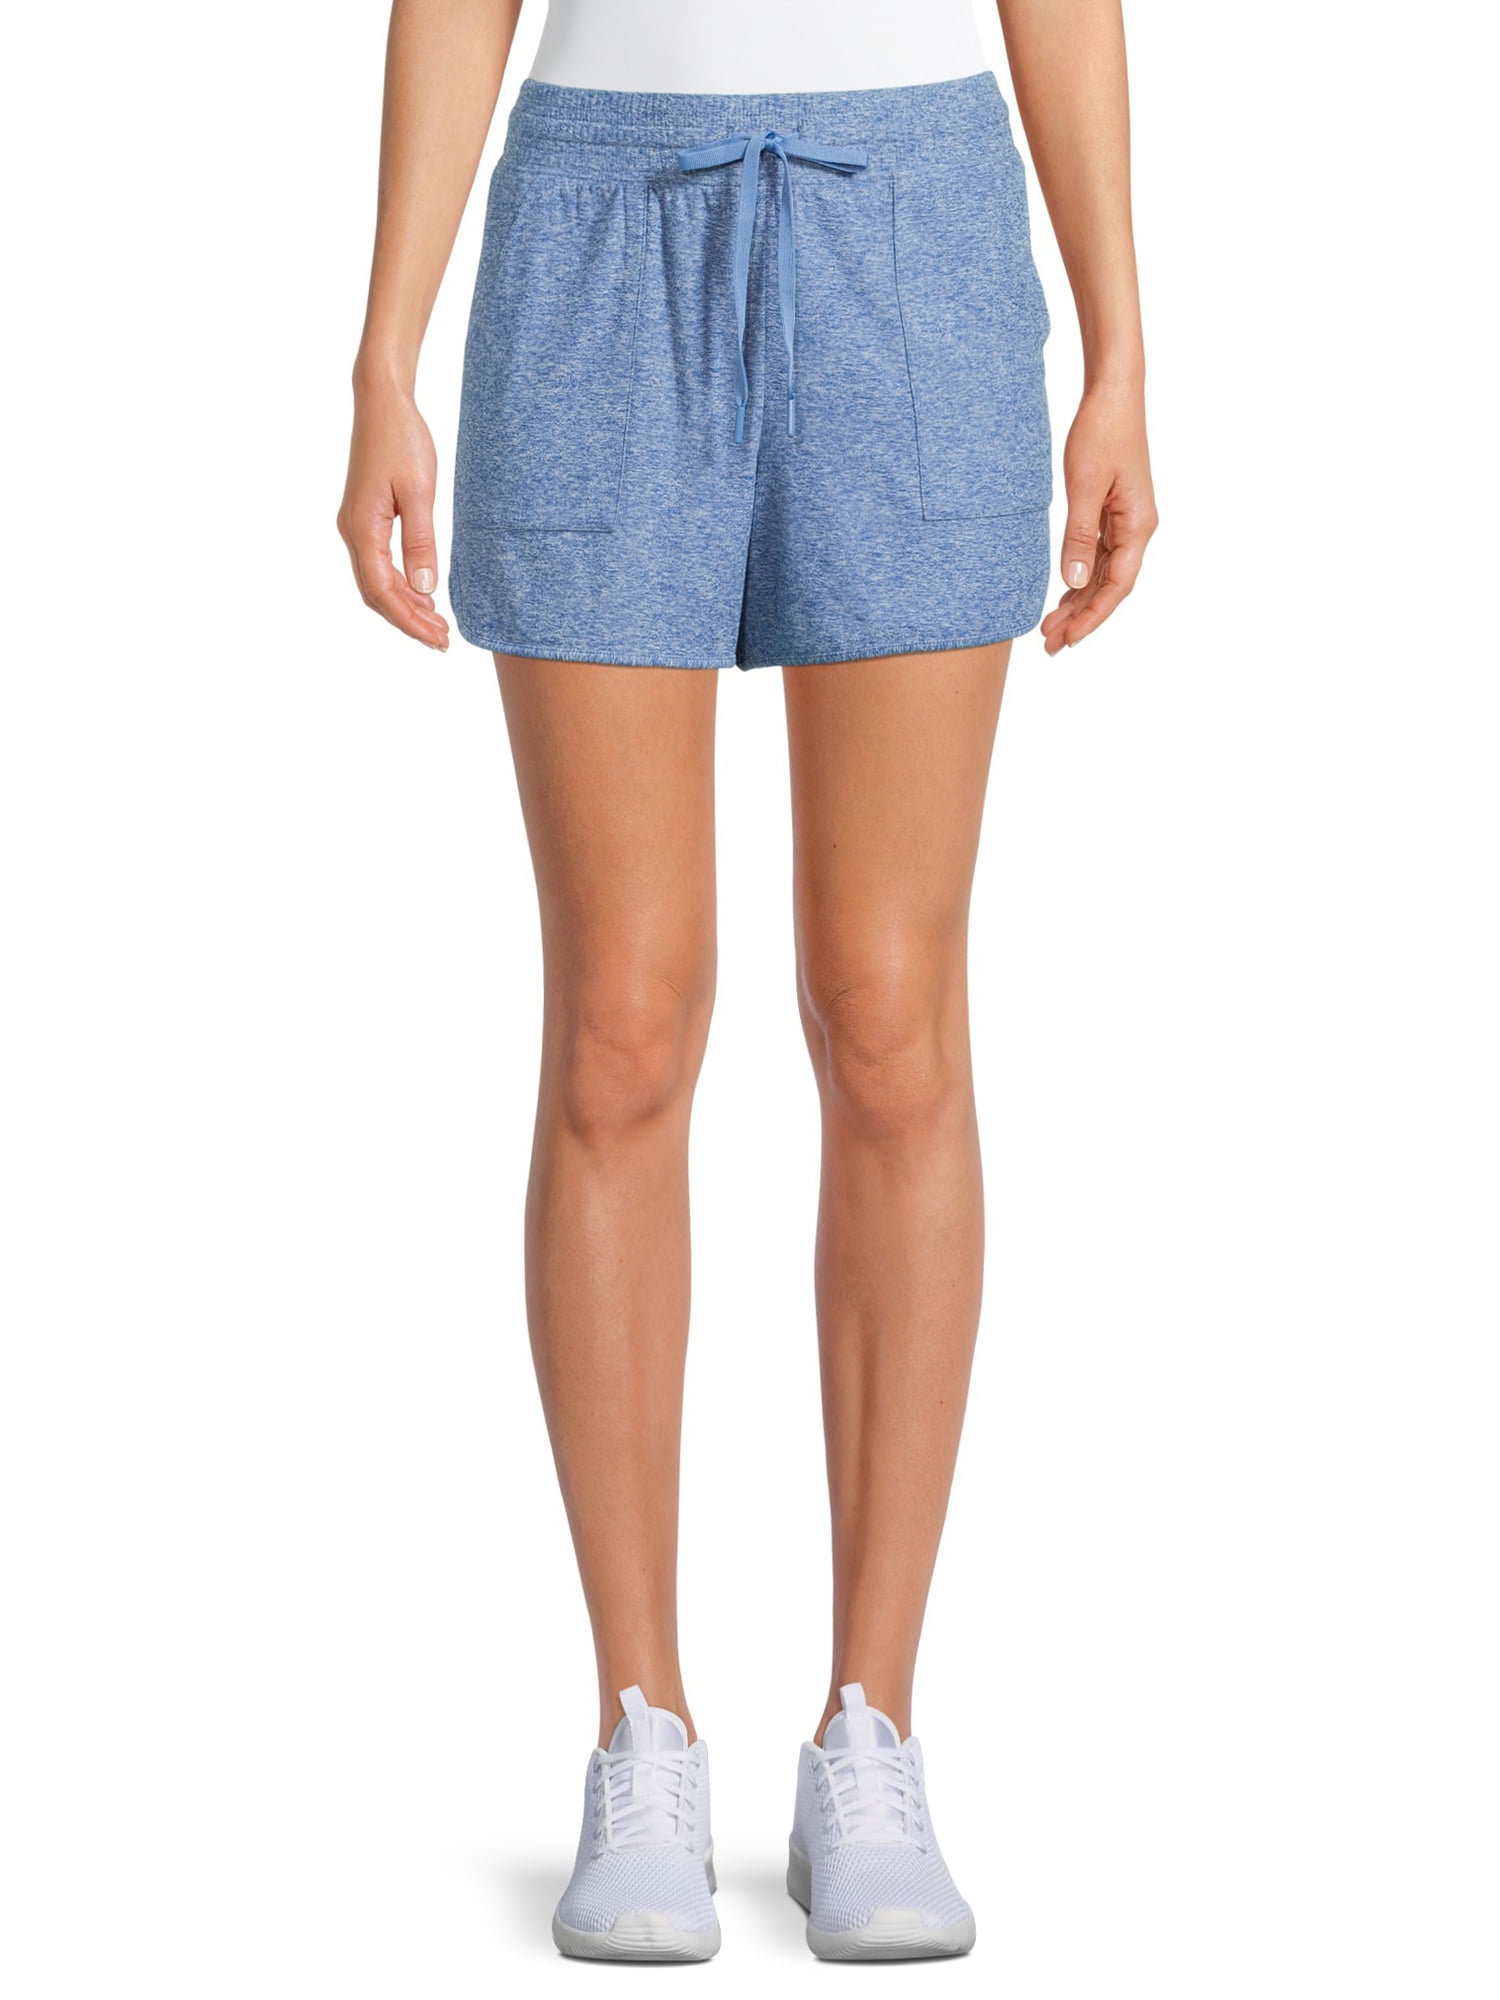 Athletic Works Women's Gym Shorts 